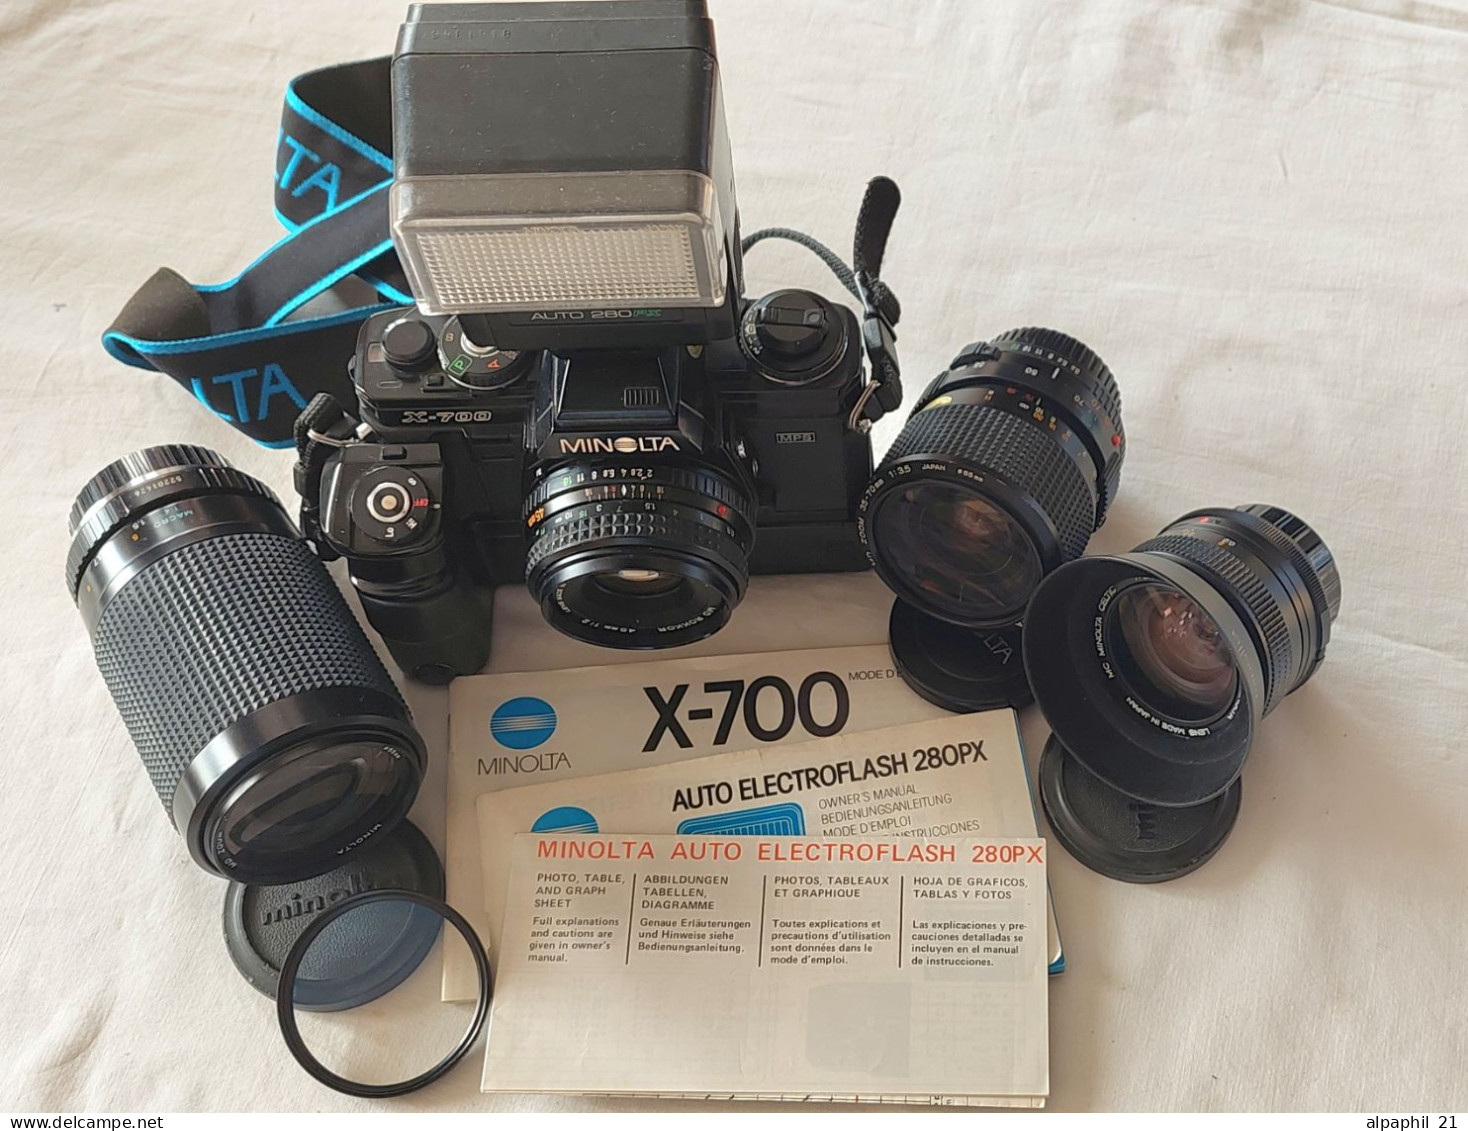 Minolta X-700 MPS With Motor Drive 1 And Lenses - Fotoapparate